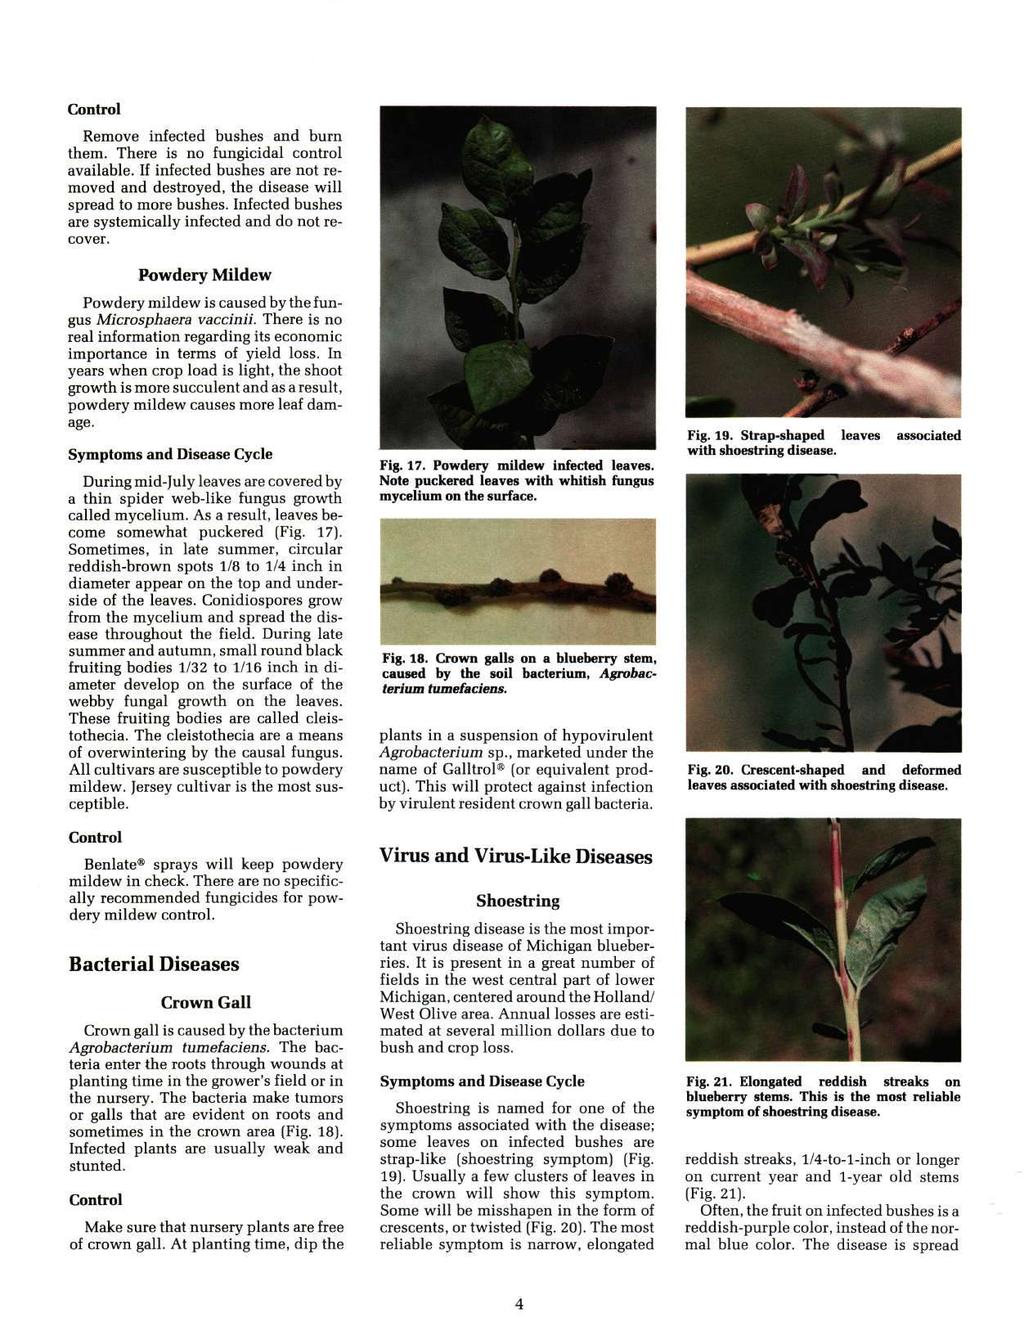 Remove infected bushes and burn them. There is no fungicidal control available. If infected bushes are not removed and destroyed, the disease will spread to more bushes.